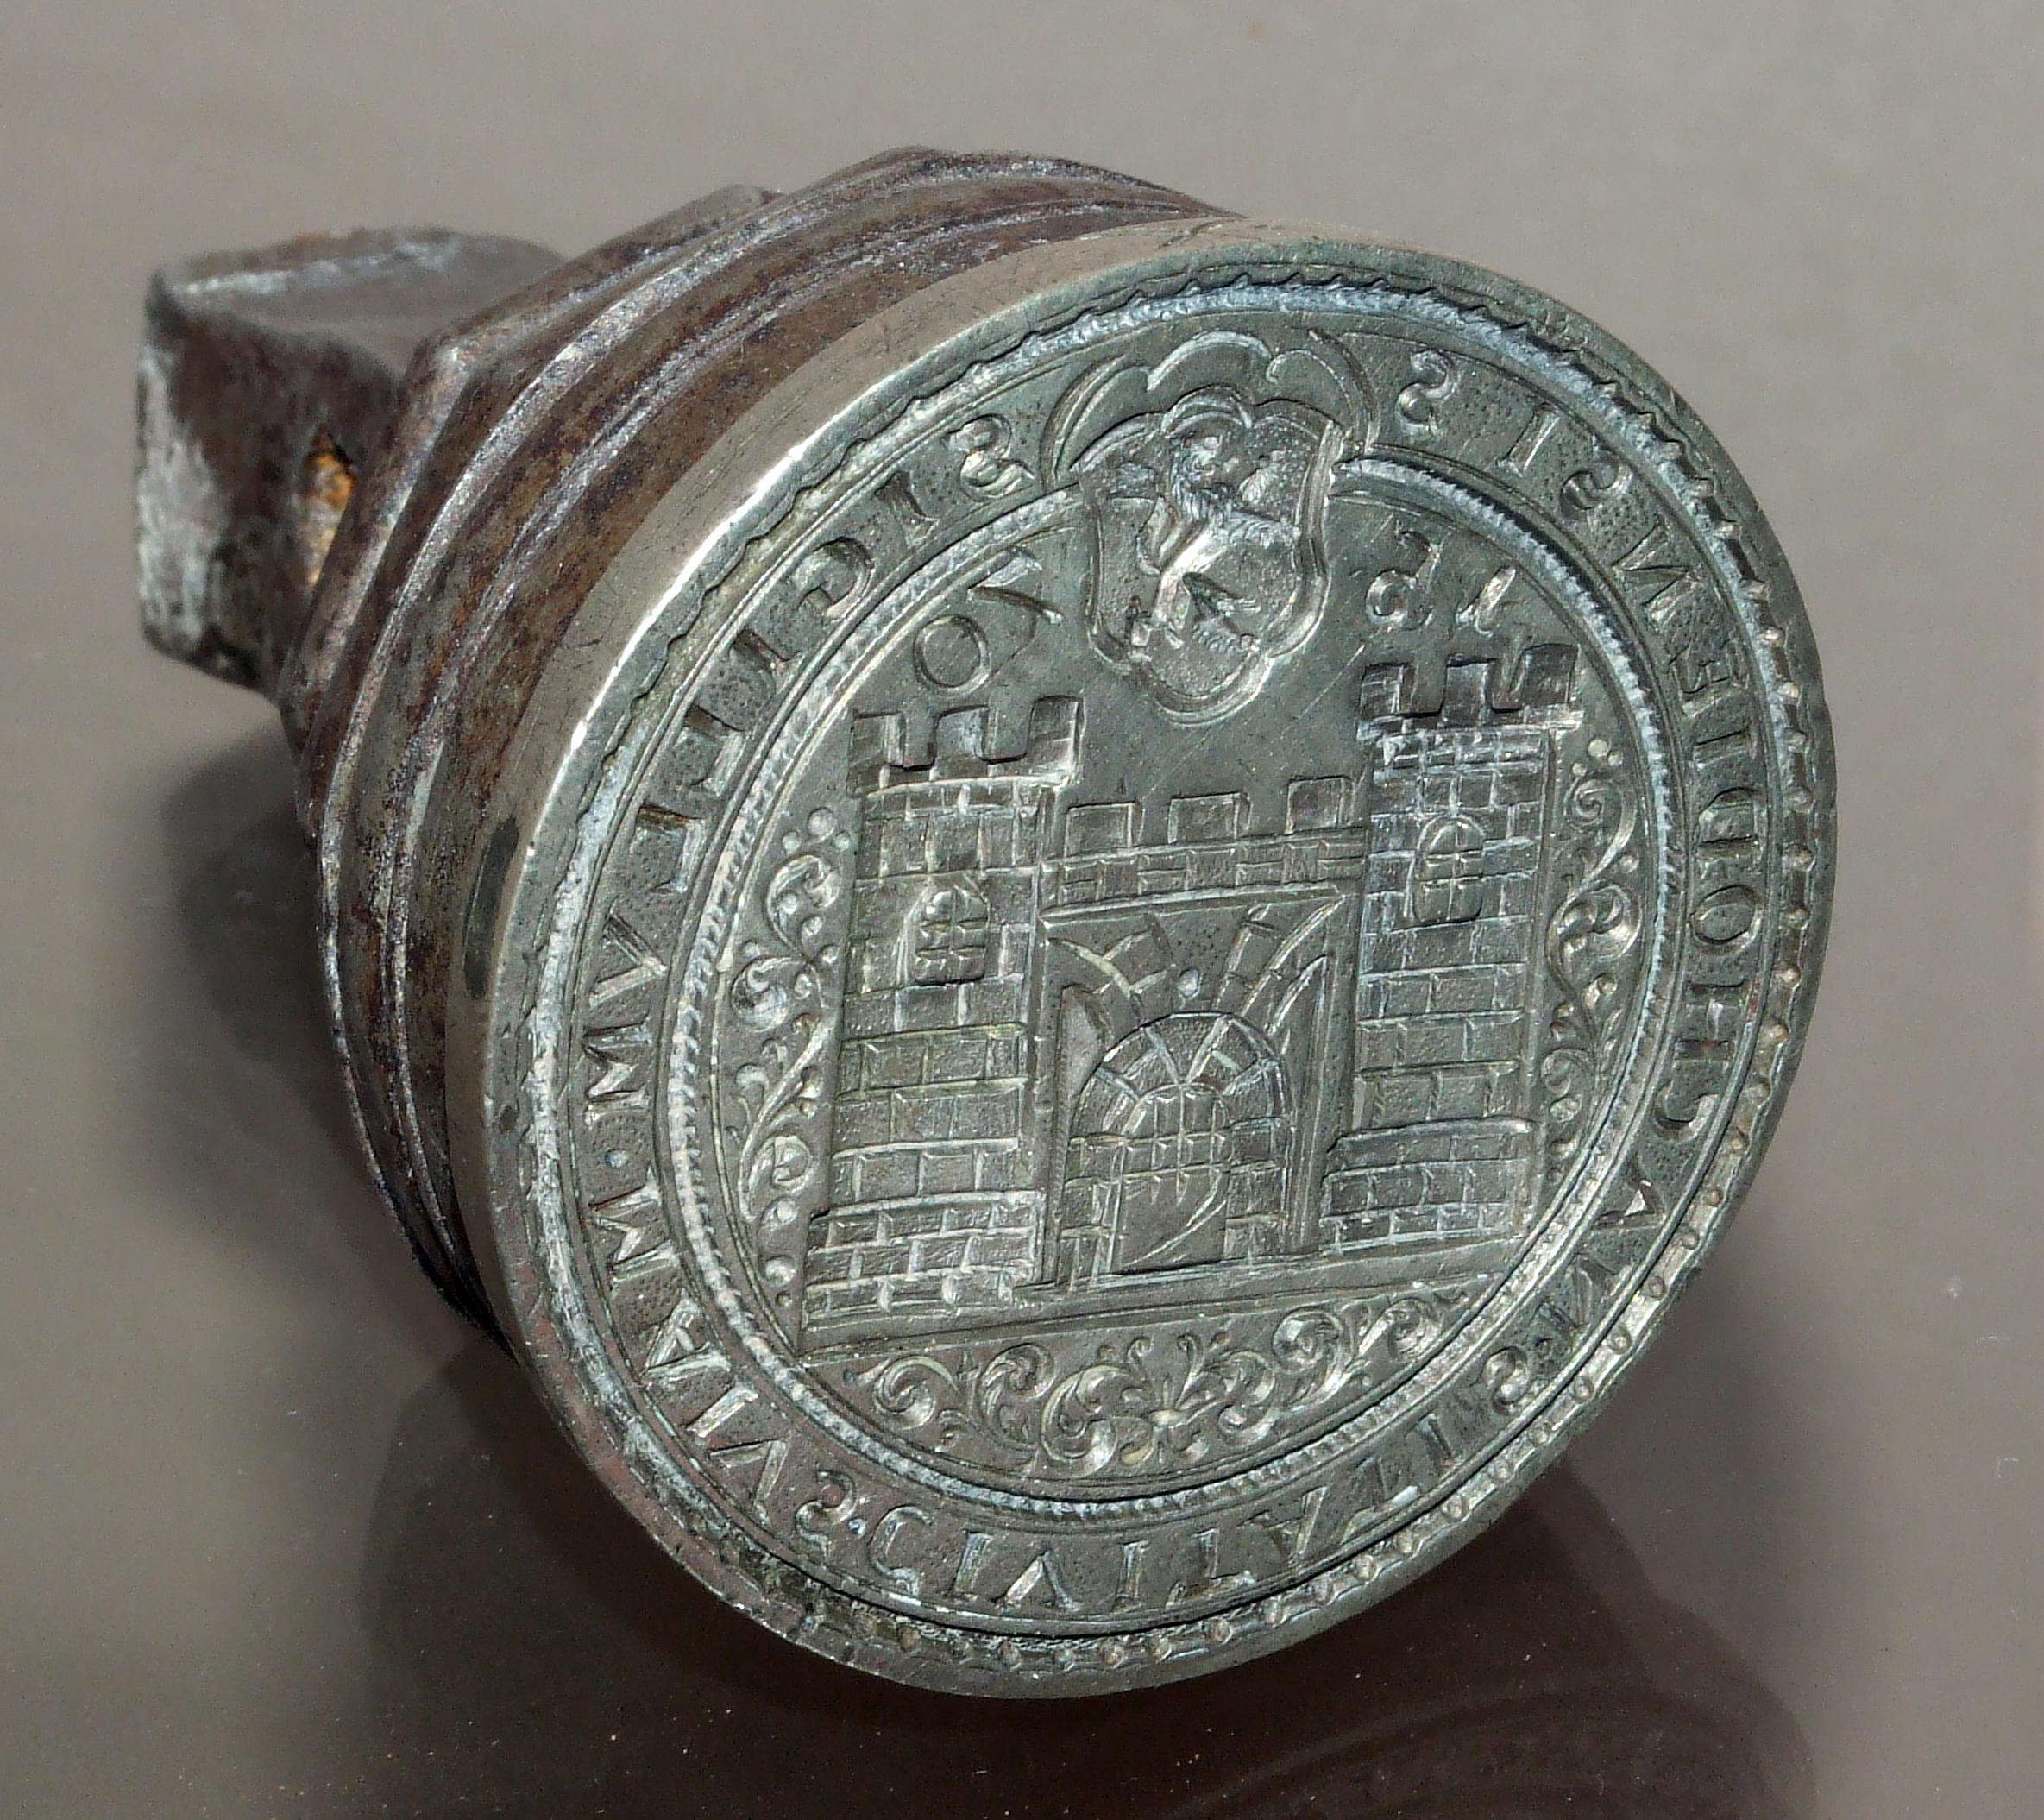 Seal of Náchod town from 1570 (big)